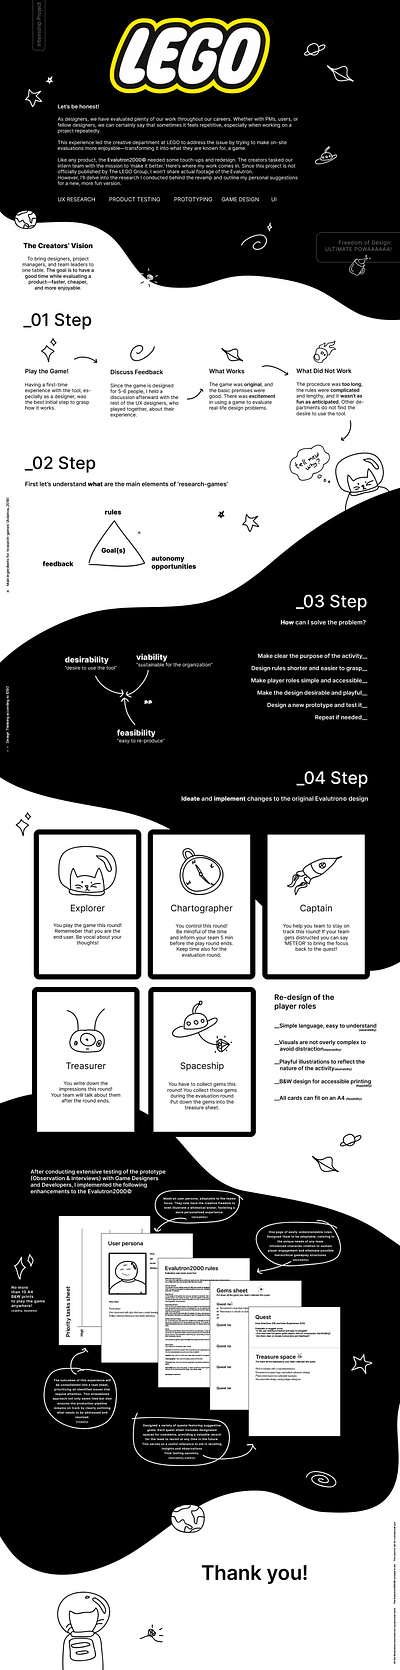 Gamified evaluation tool gamification graphic design illustration ux